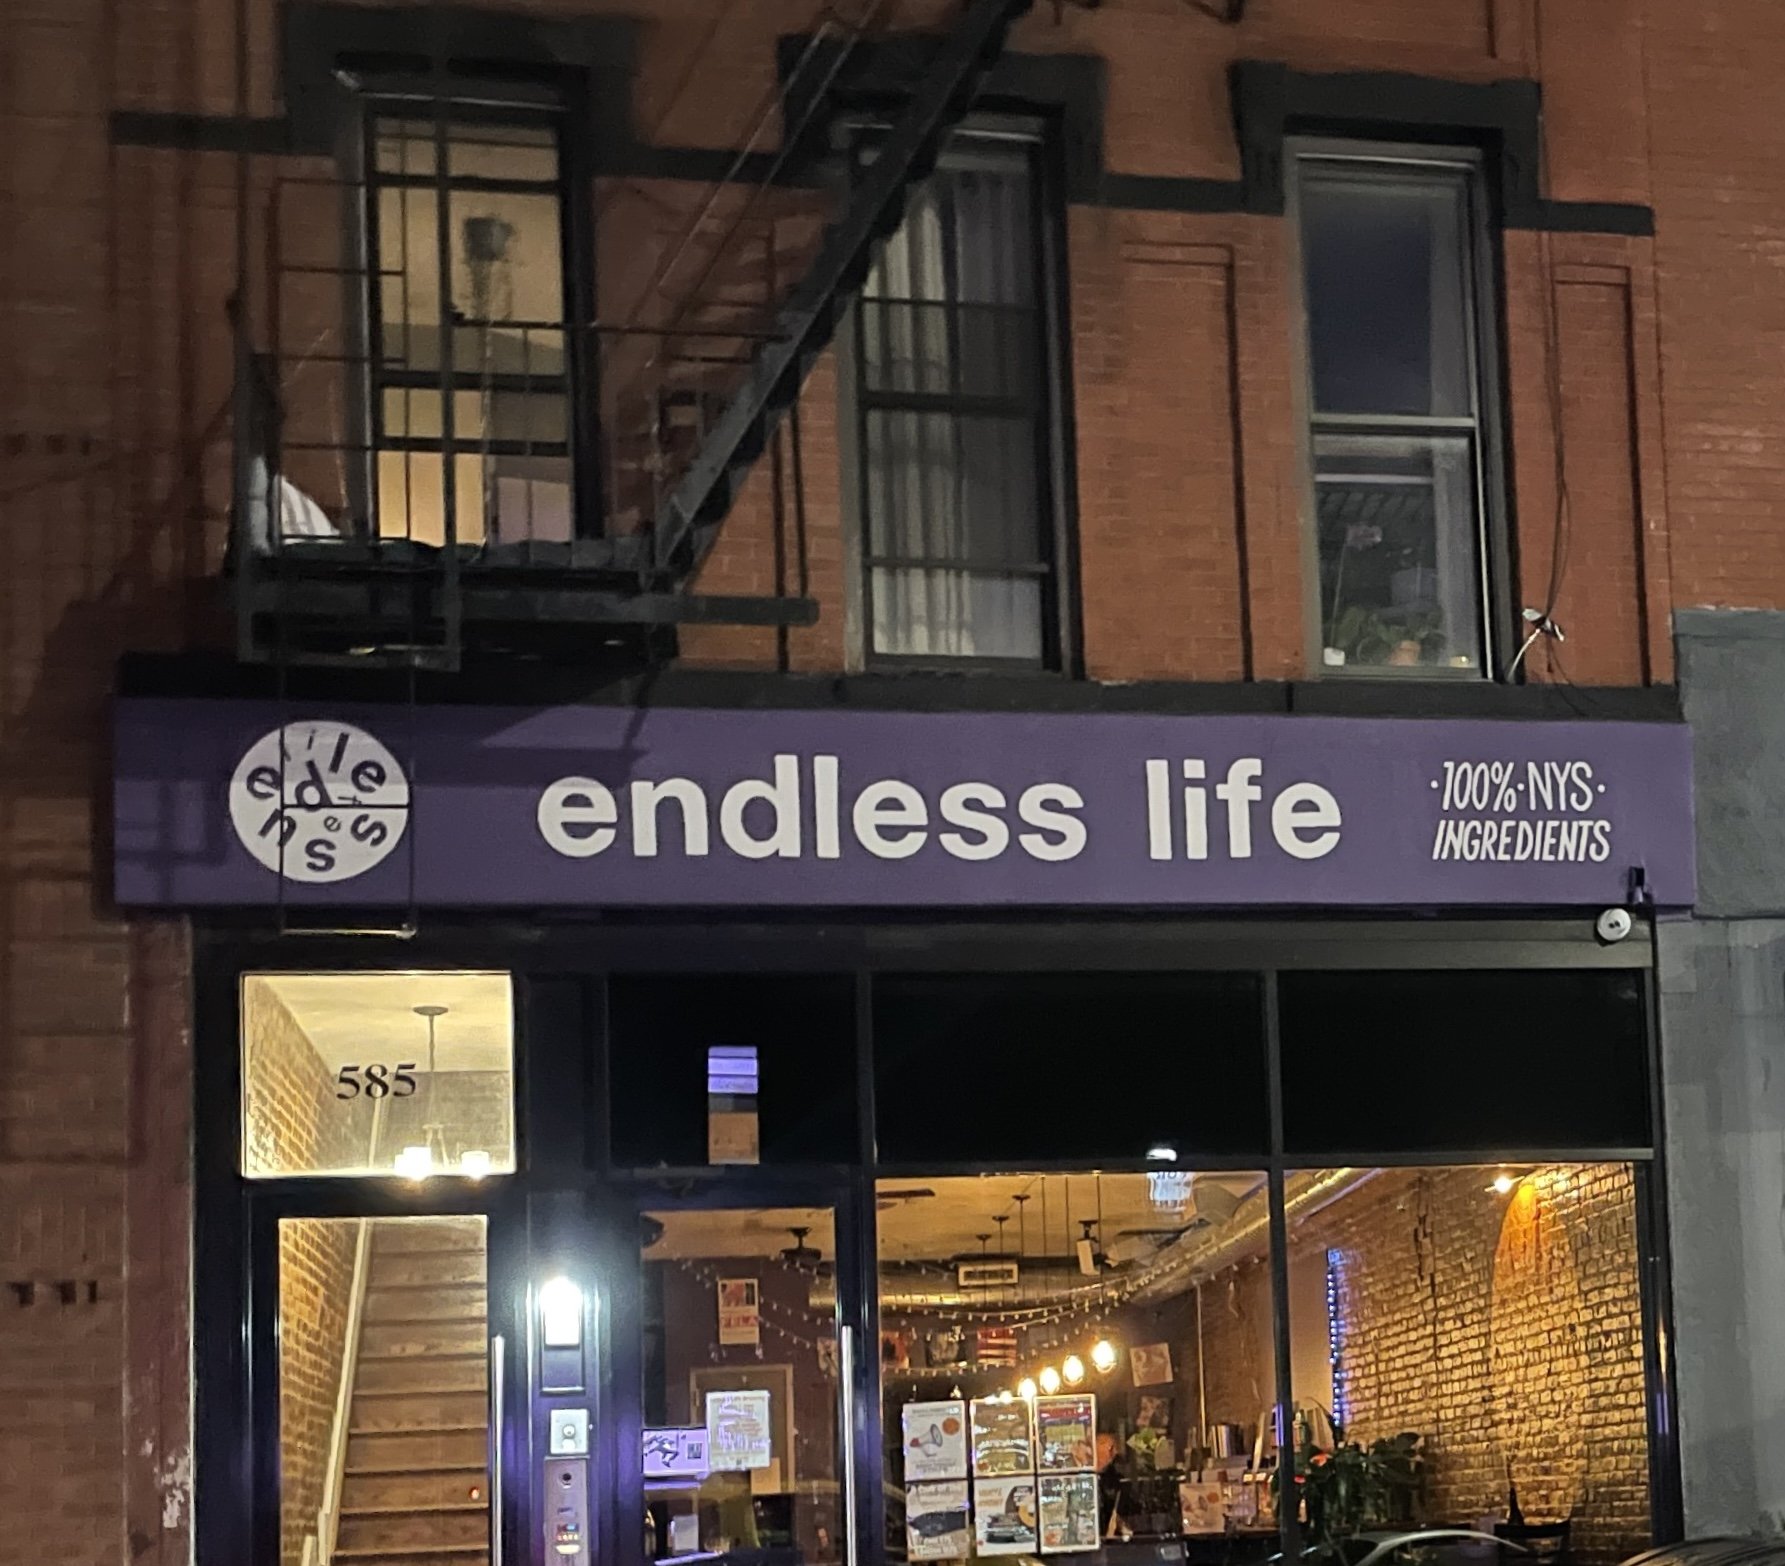  Crown Hts., Brooklyn, NY.  “Endlesss Life 100% NYS ingredients - is the perpetual pursuit of better beer through a passionate focus on quality, community, and intent."   One shouldn’t forget their Monthly Drag Queen Bingo event. 